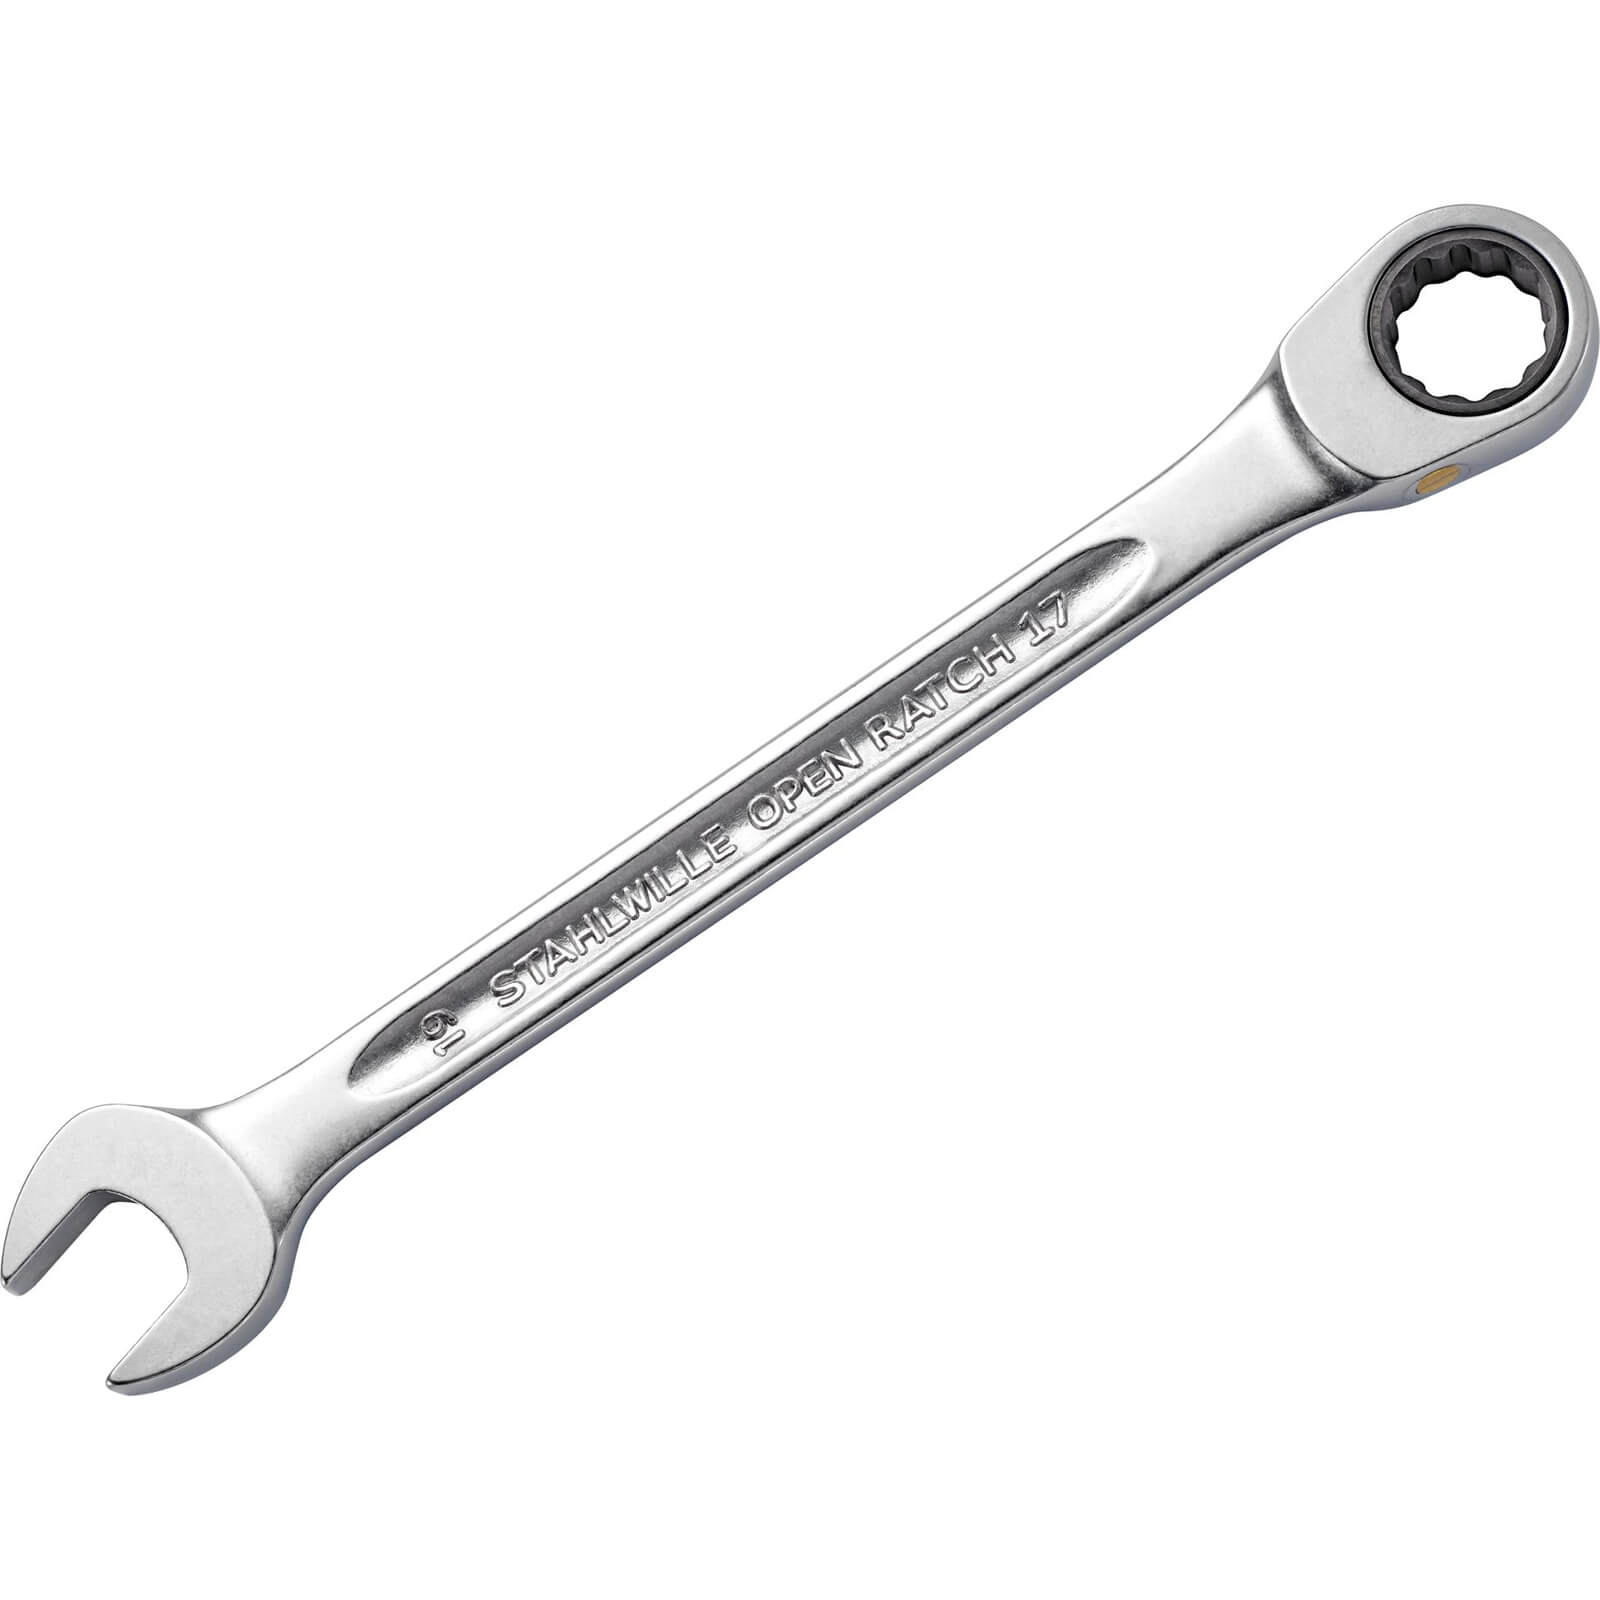 Image of Stahlwille 17F Ratchet Combination Spanner 19mm